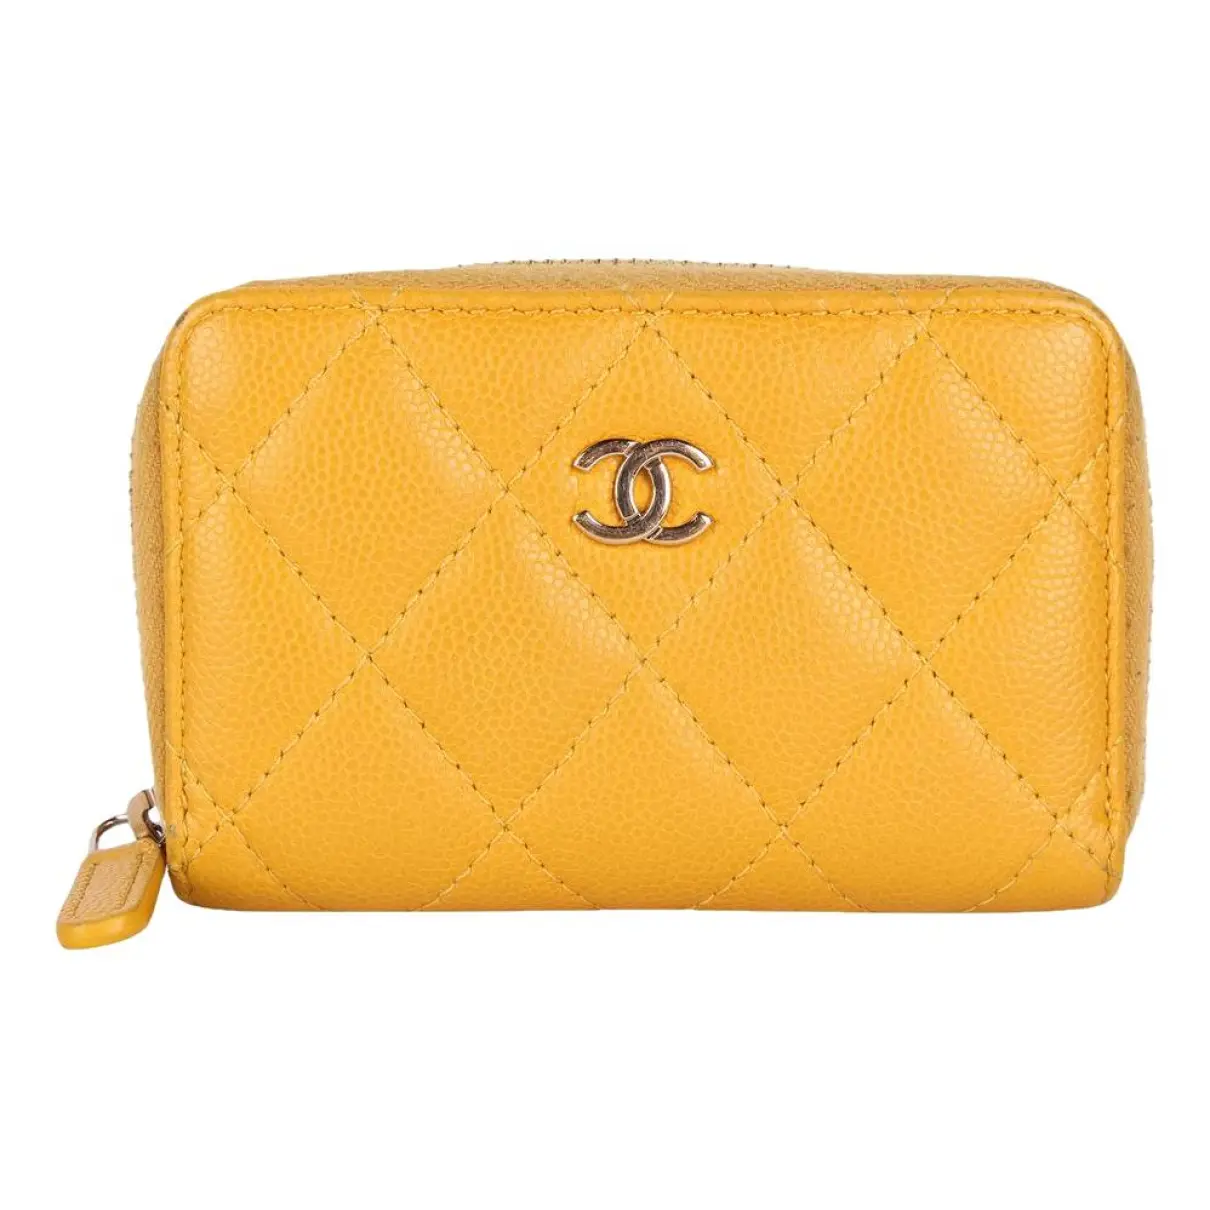 Chanel 19 leather purse